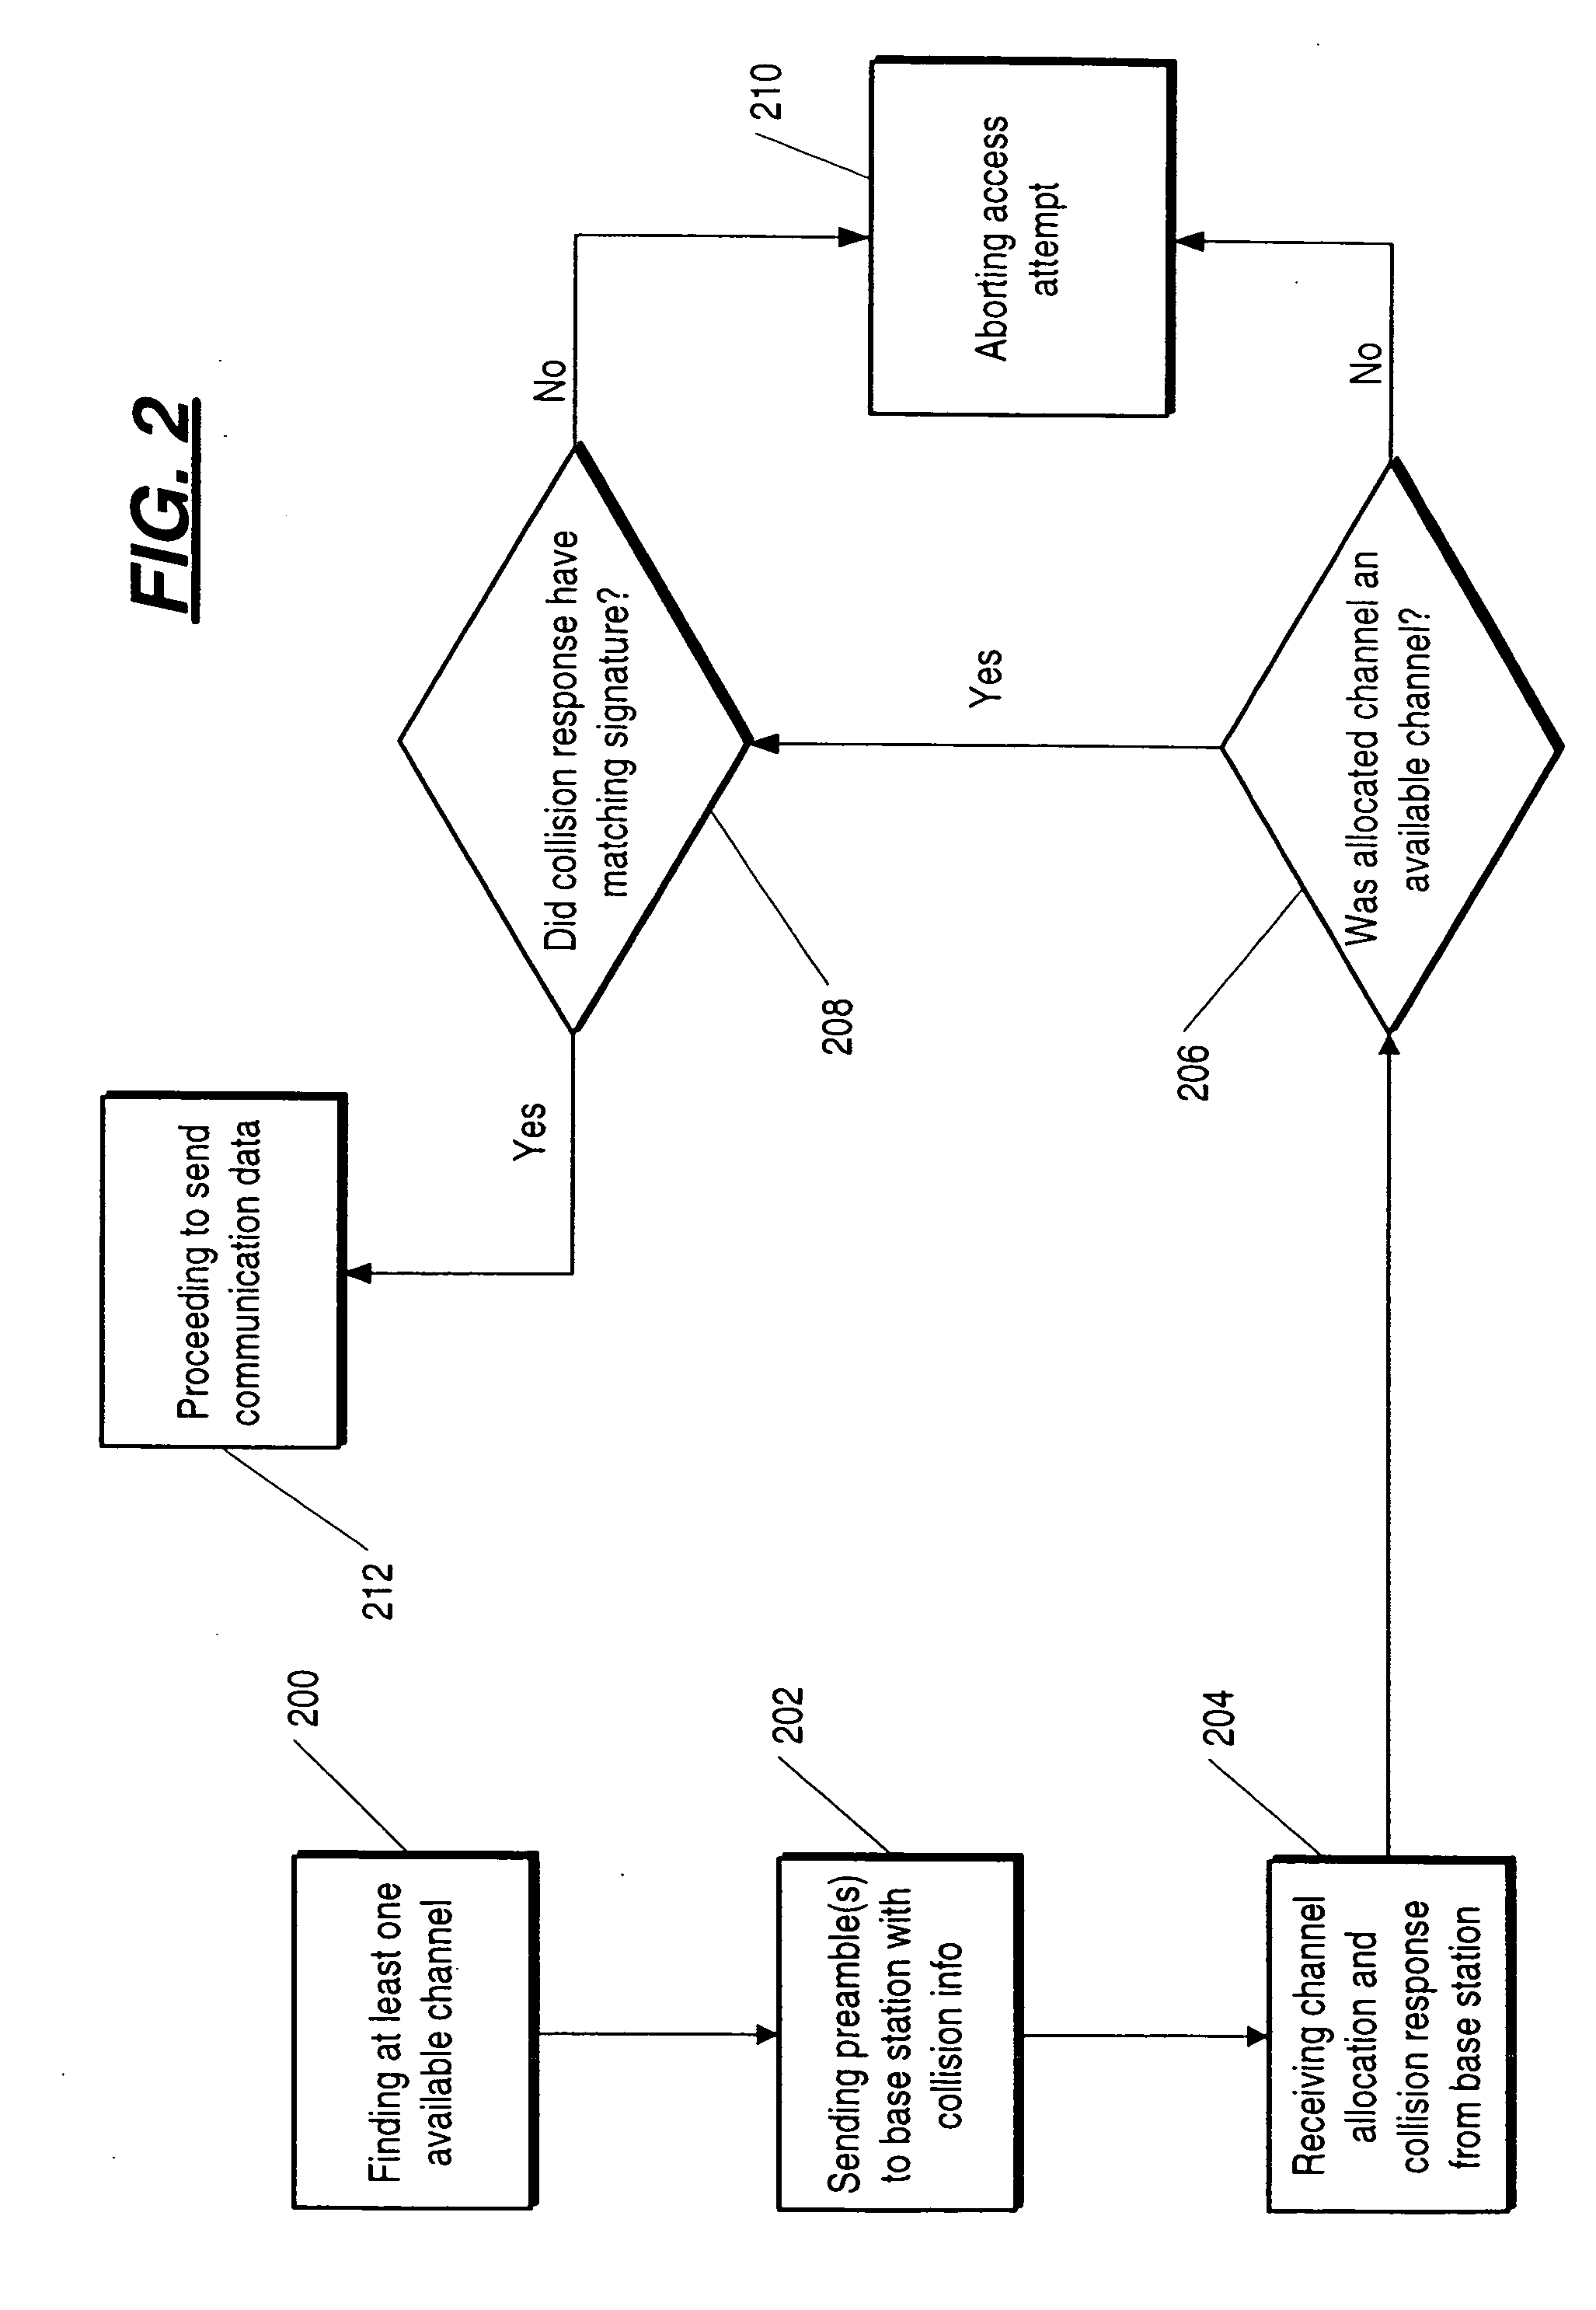 Common packet channel assignment method and apparatus